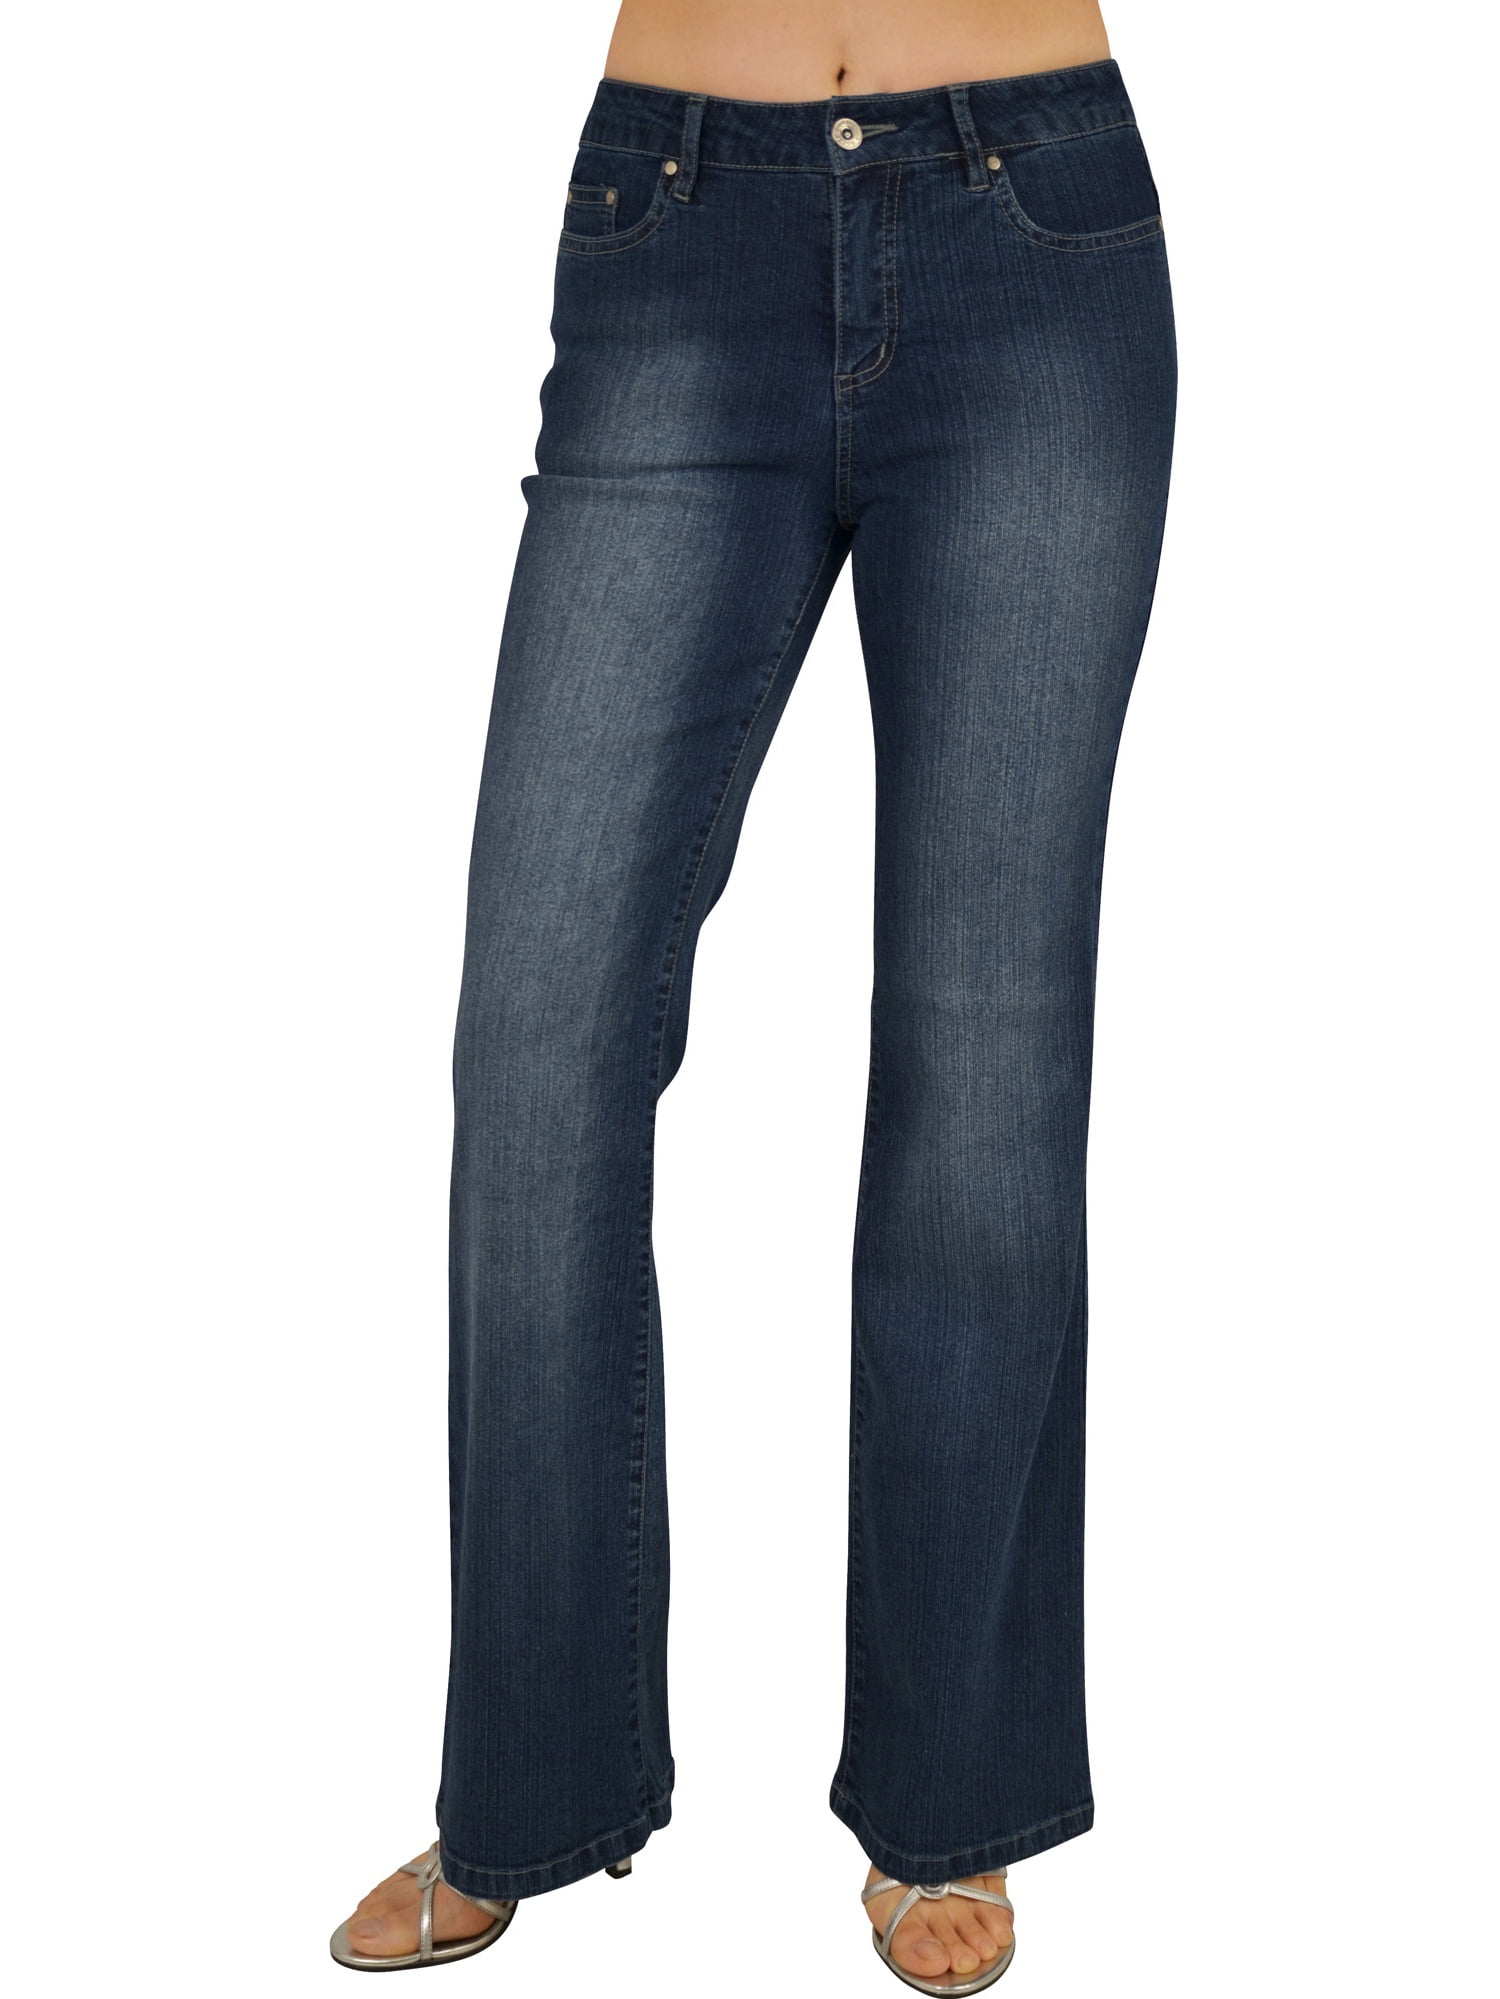 Keep In Touch - Keep_In_Touch Women's Stretch Jeans 58-31-HDSU-17 ...